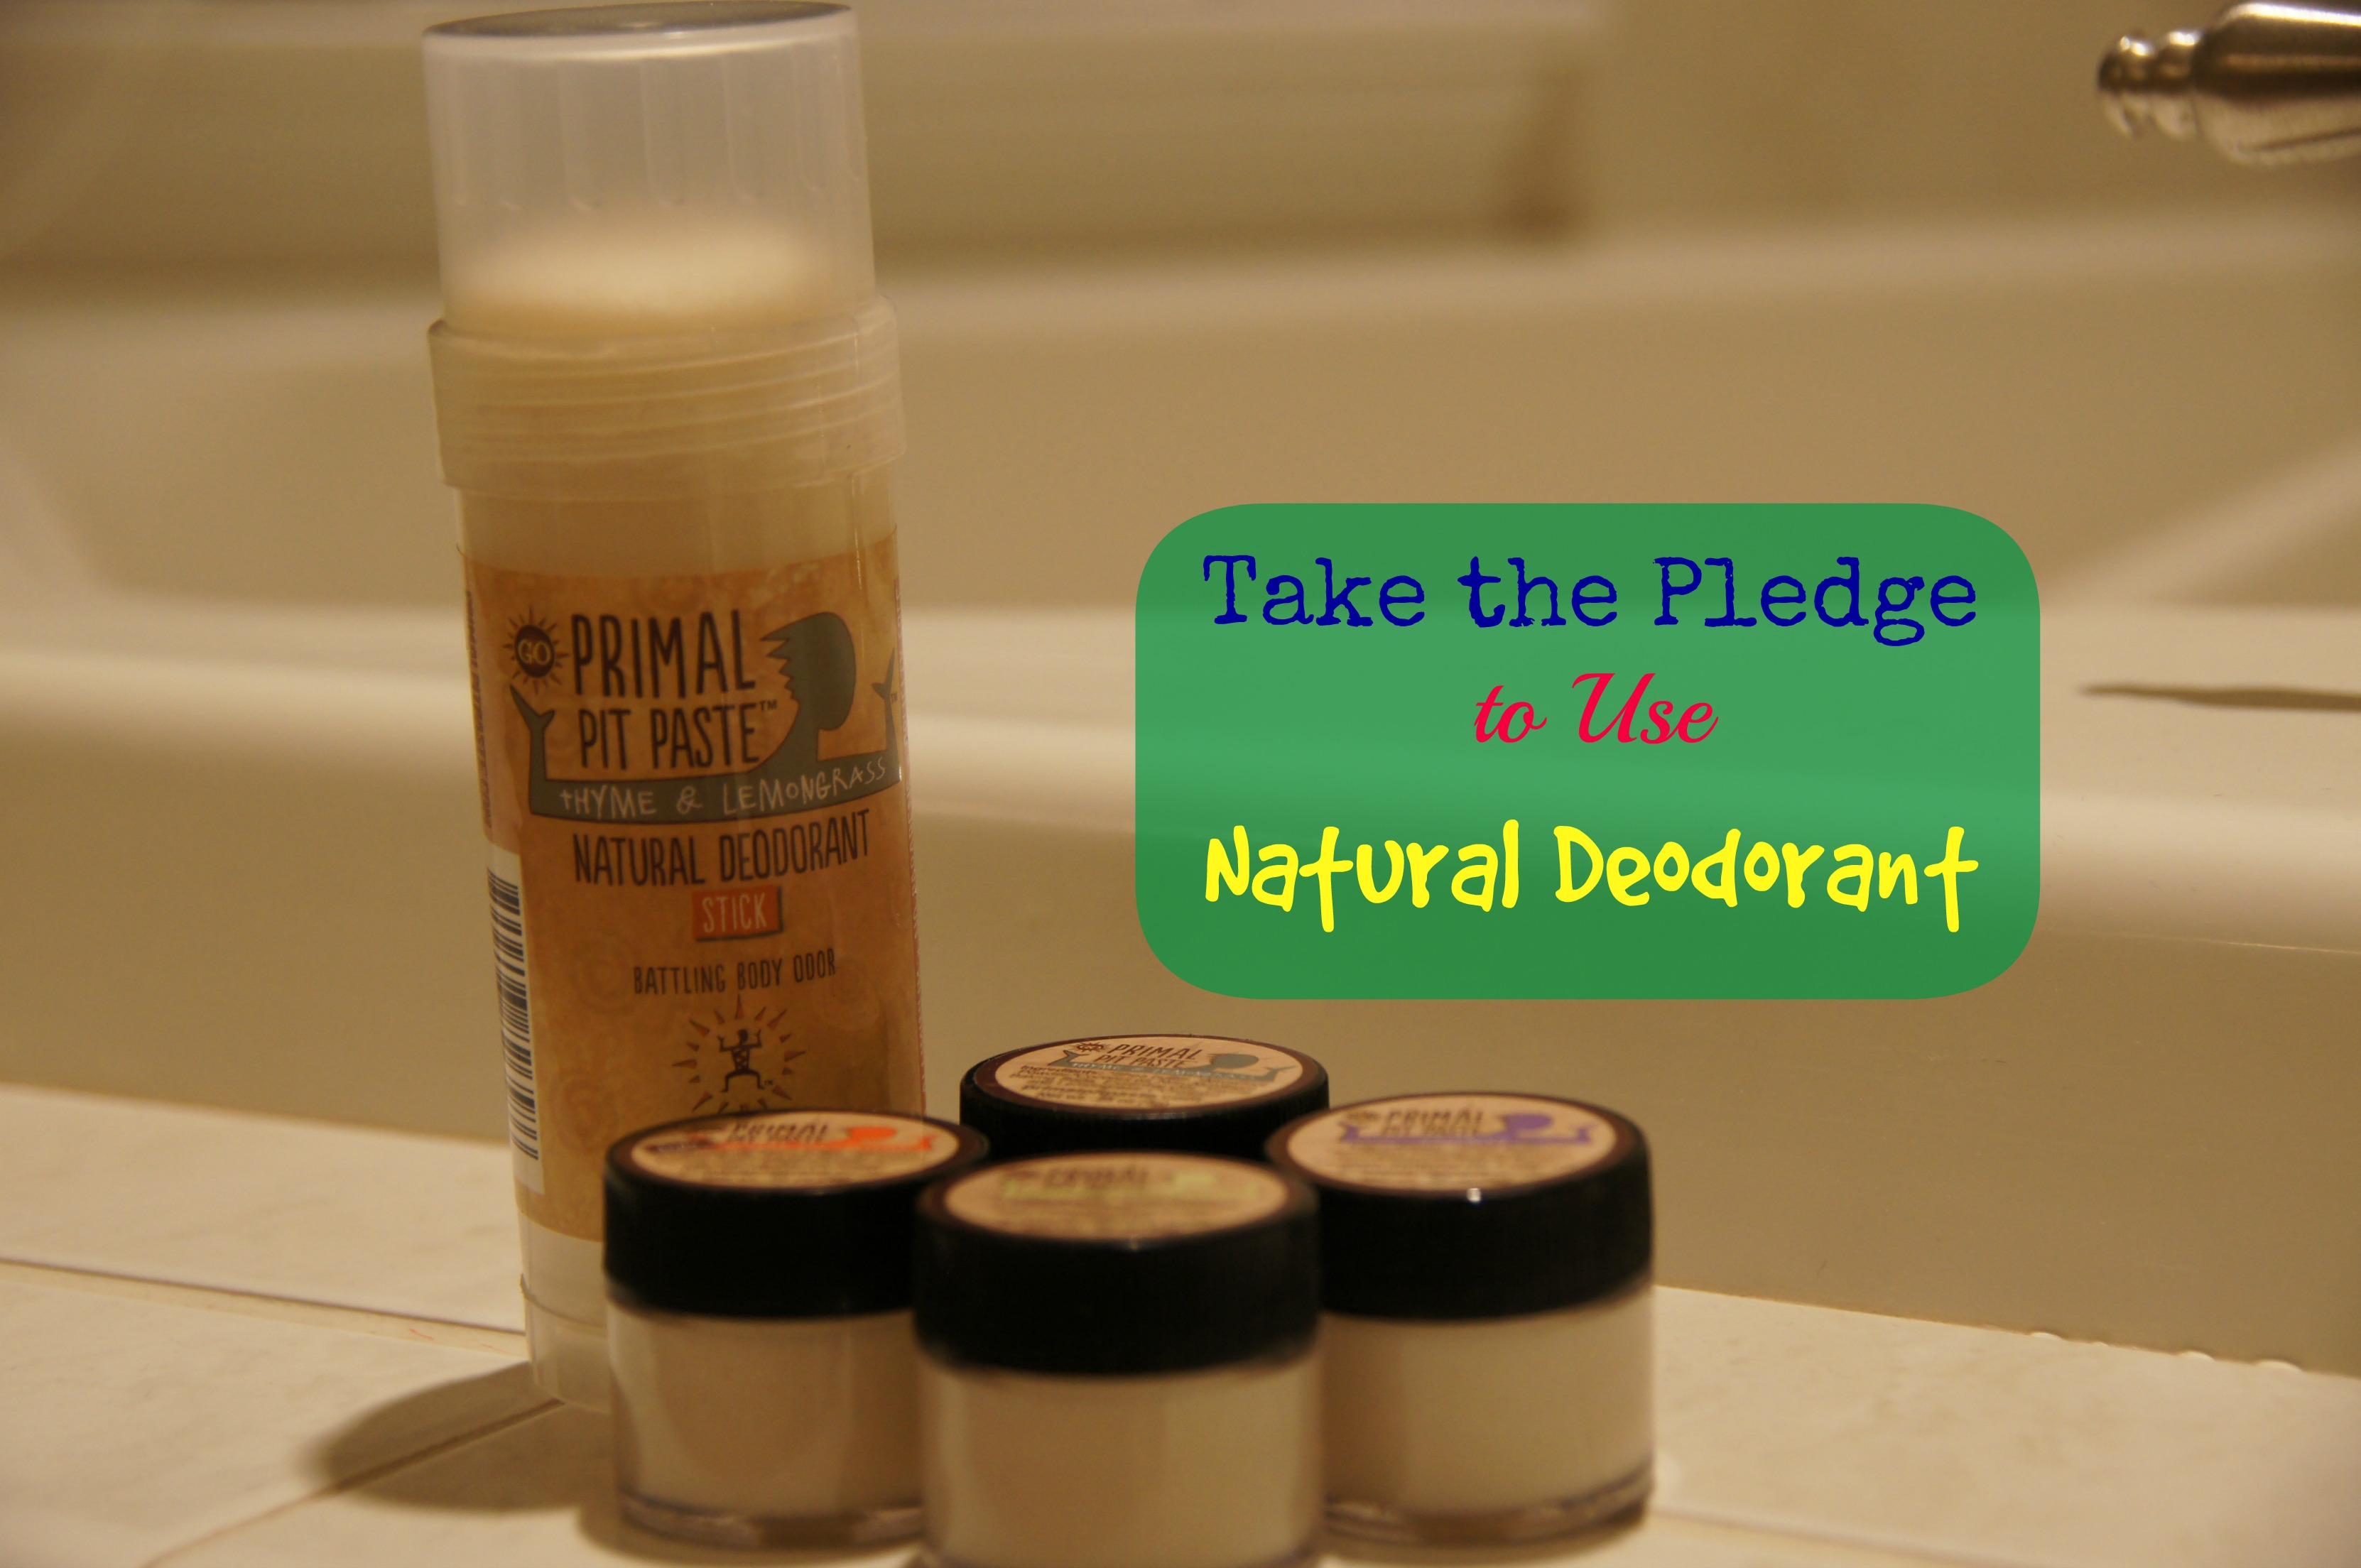 Take the Pledge to Use Natural Deodorant + a MightyNest Giveaway!